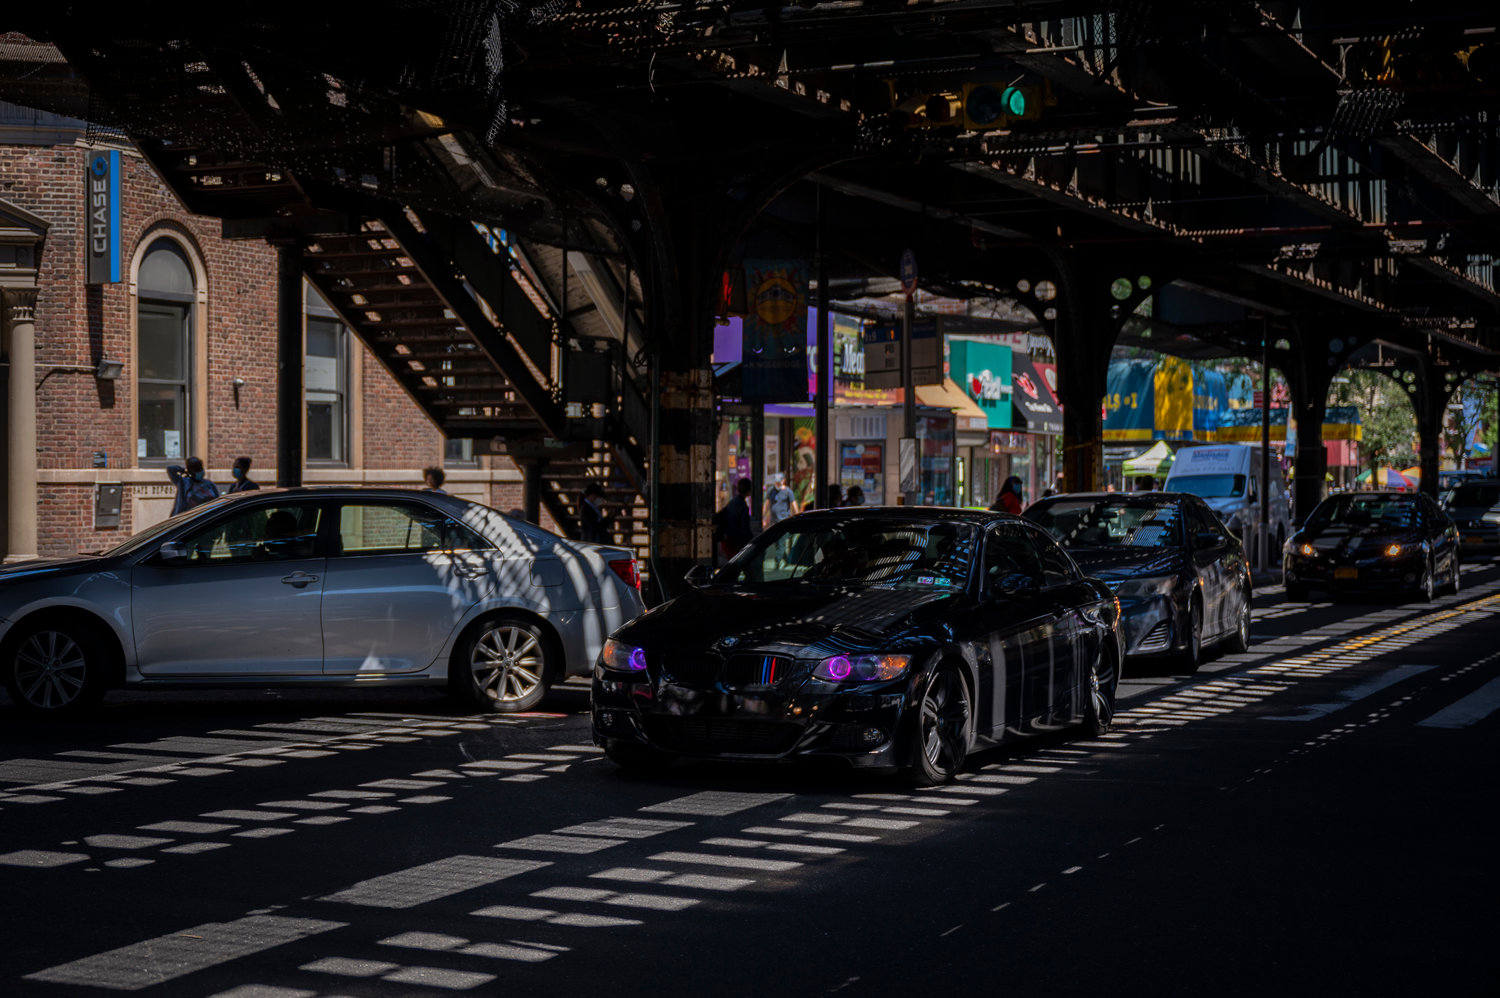 The sounds of loud souped-up cars with modified mufflers have become a public nuisance in this corner of the Bronx over the past year, says Community Board 8 public safety chair Ed Green. That’s why Brooklyn state Sen. Andrew Gounardes sponsored the SLEEP Act, a bill intended raise fines on those caught driving cars with these noisy modifications.